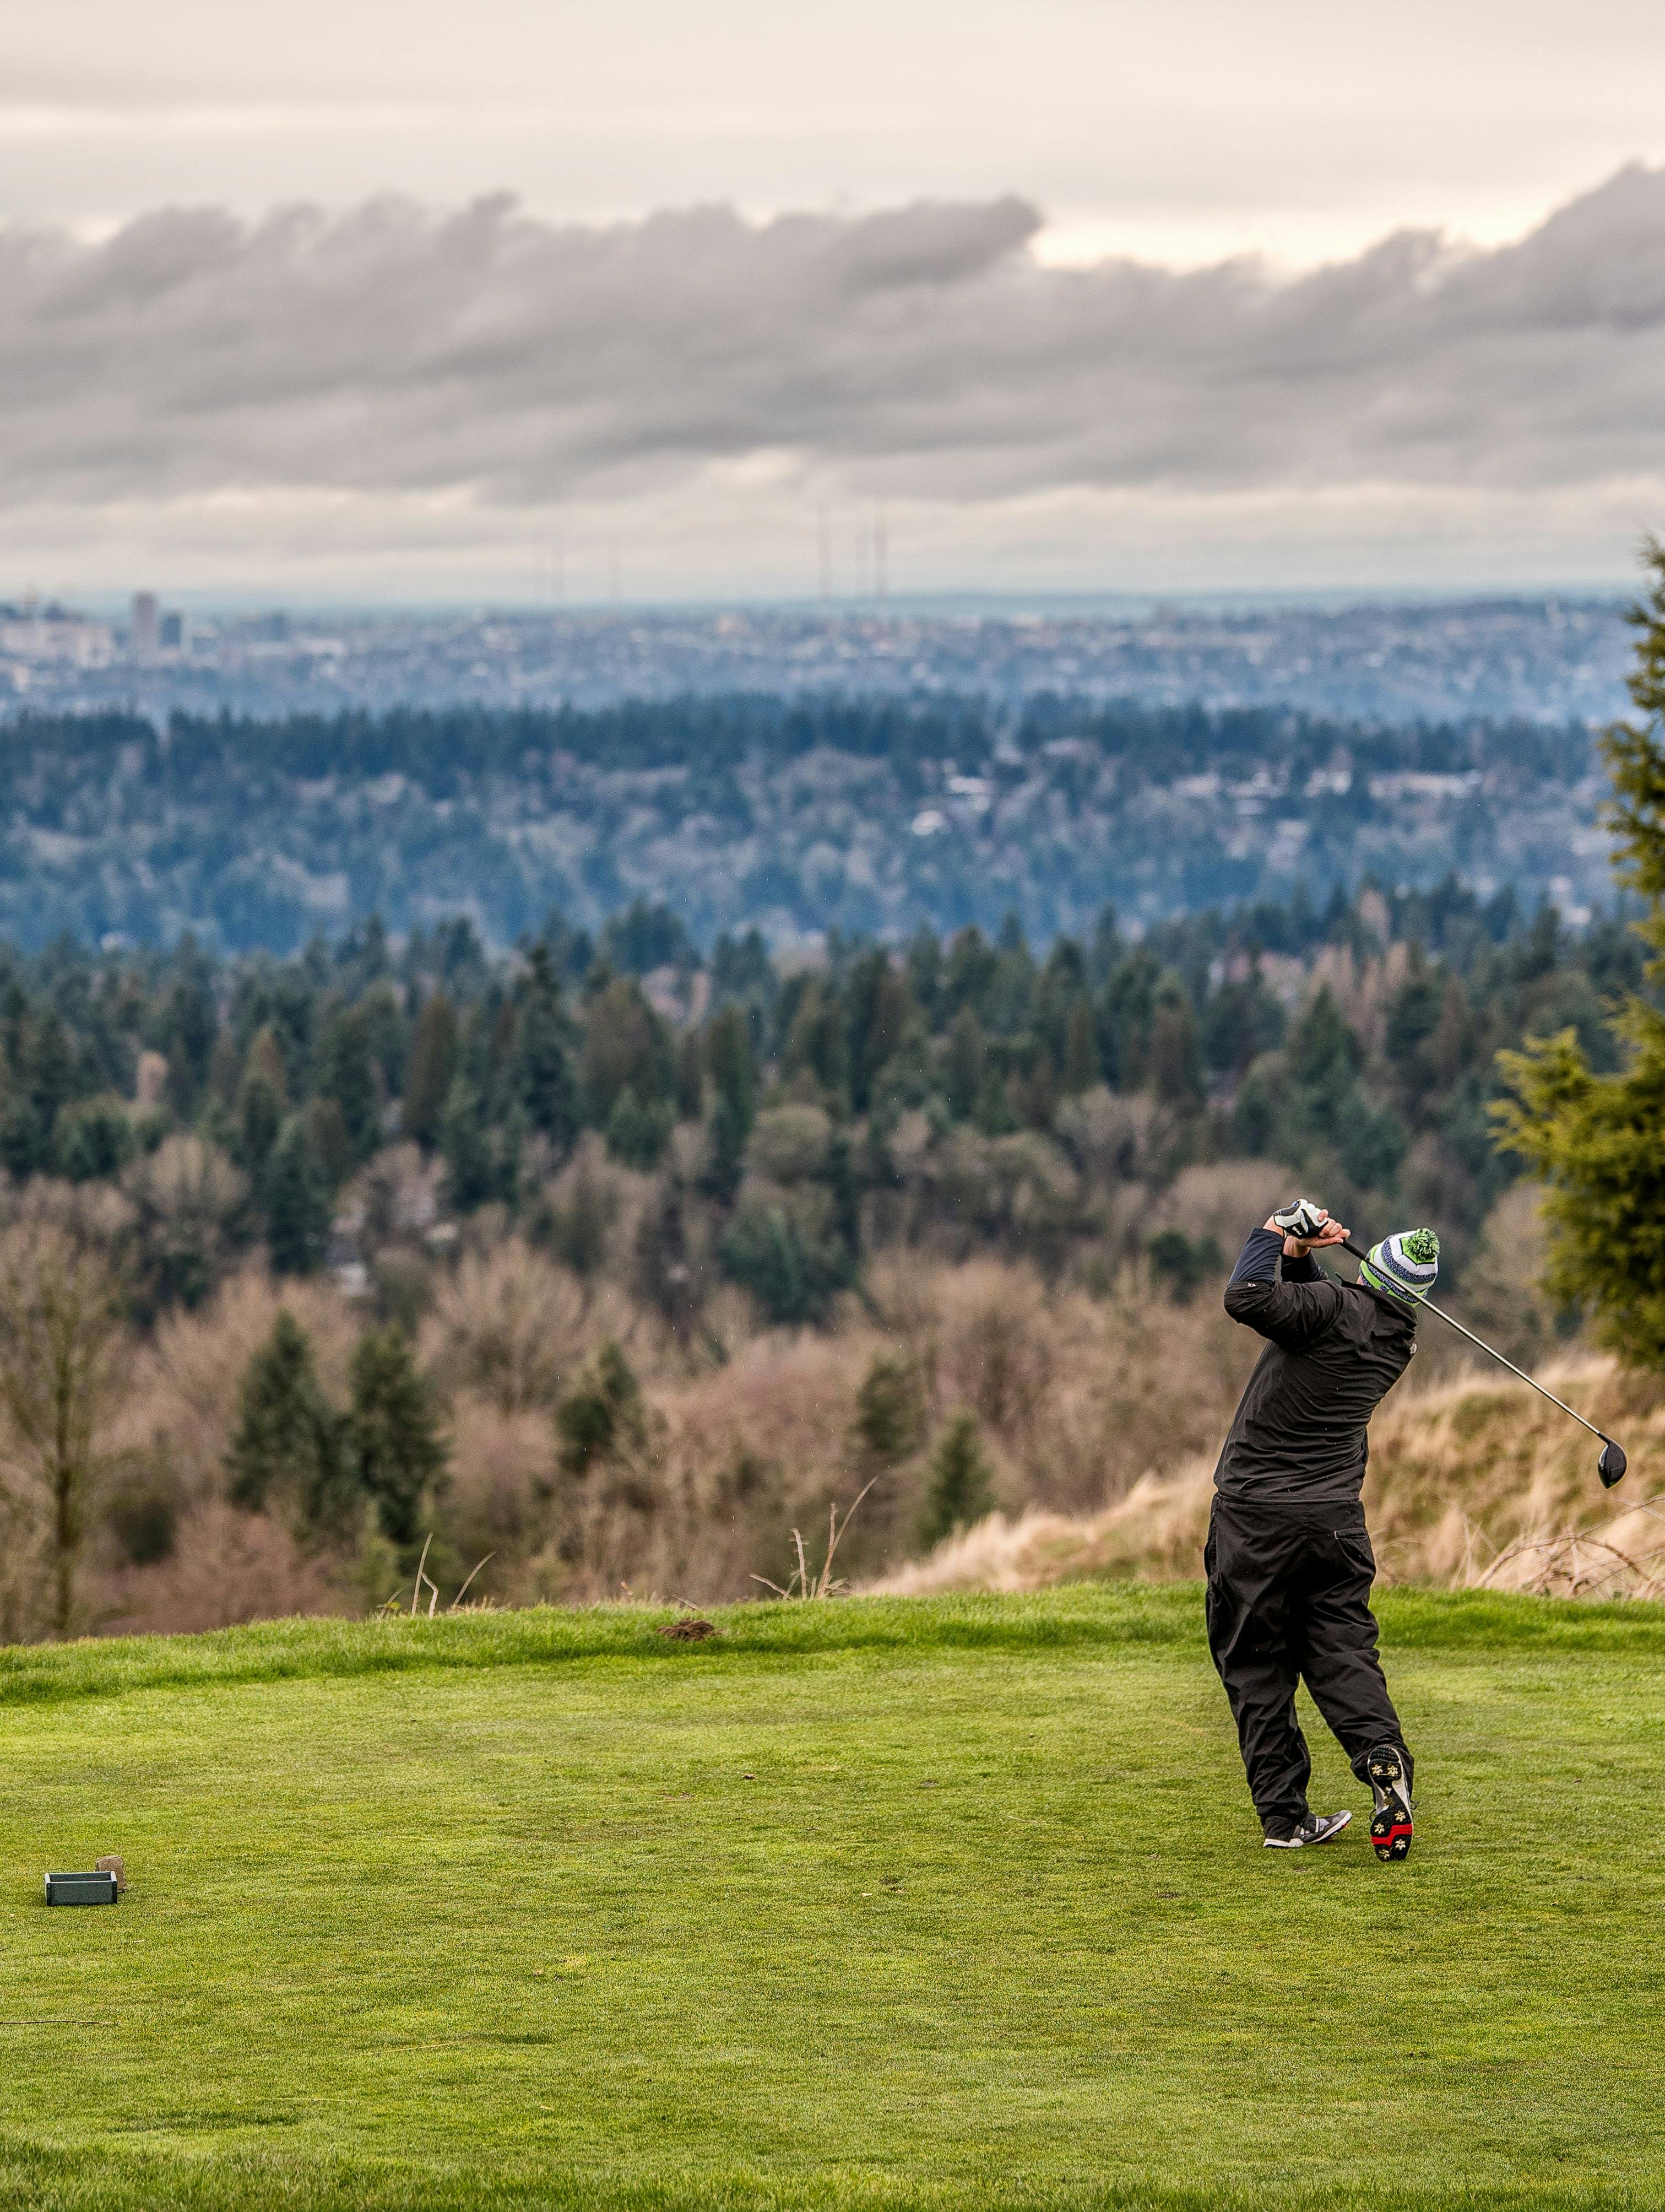 A man swings back his golf club on a course in the winter.